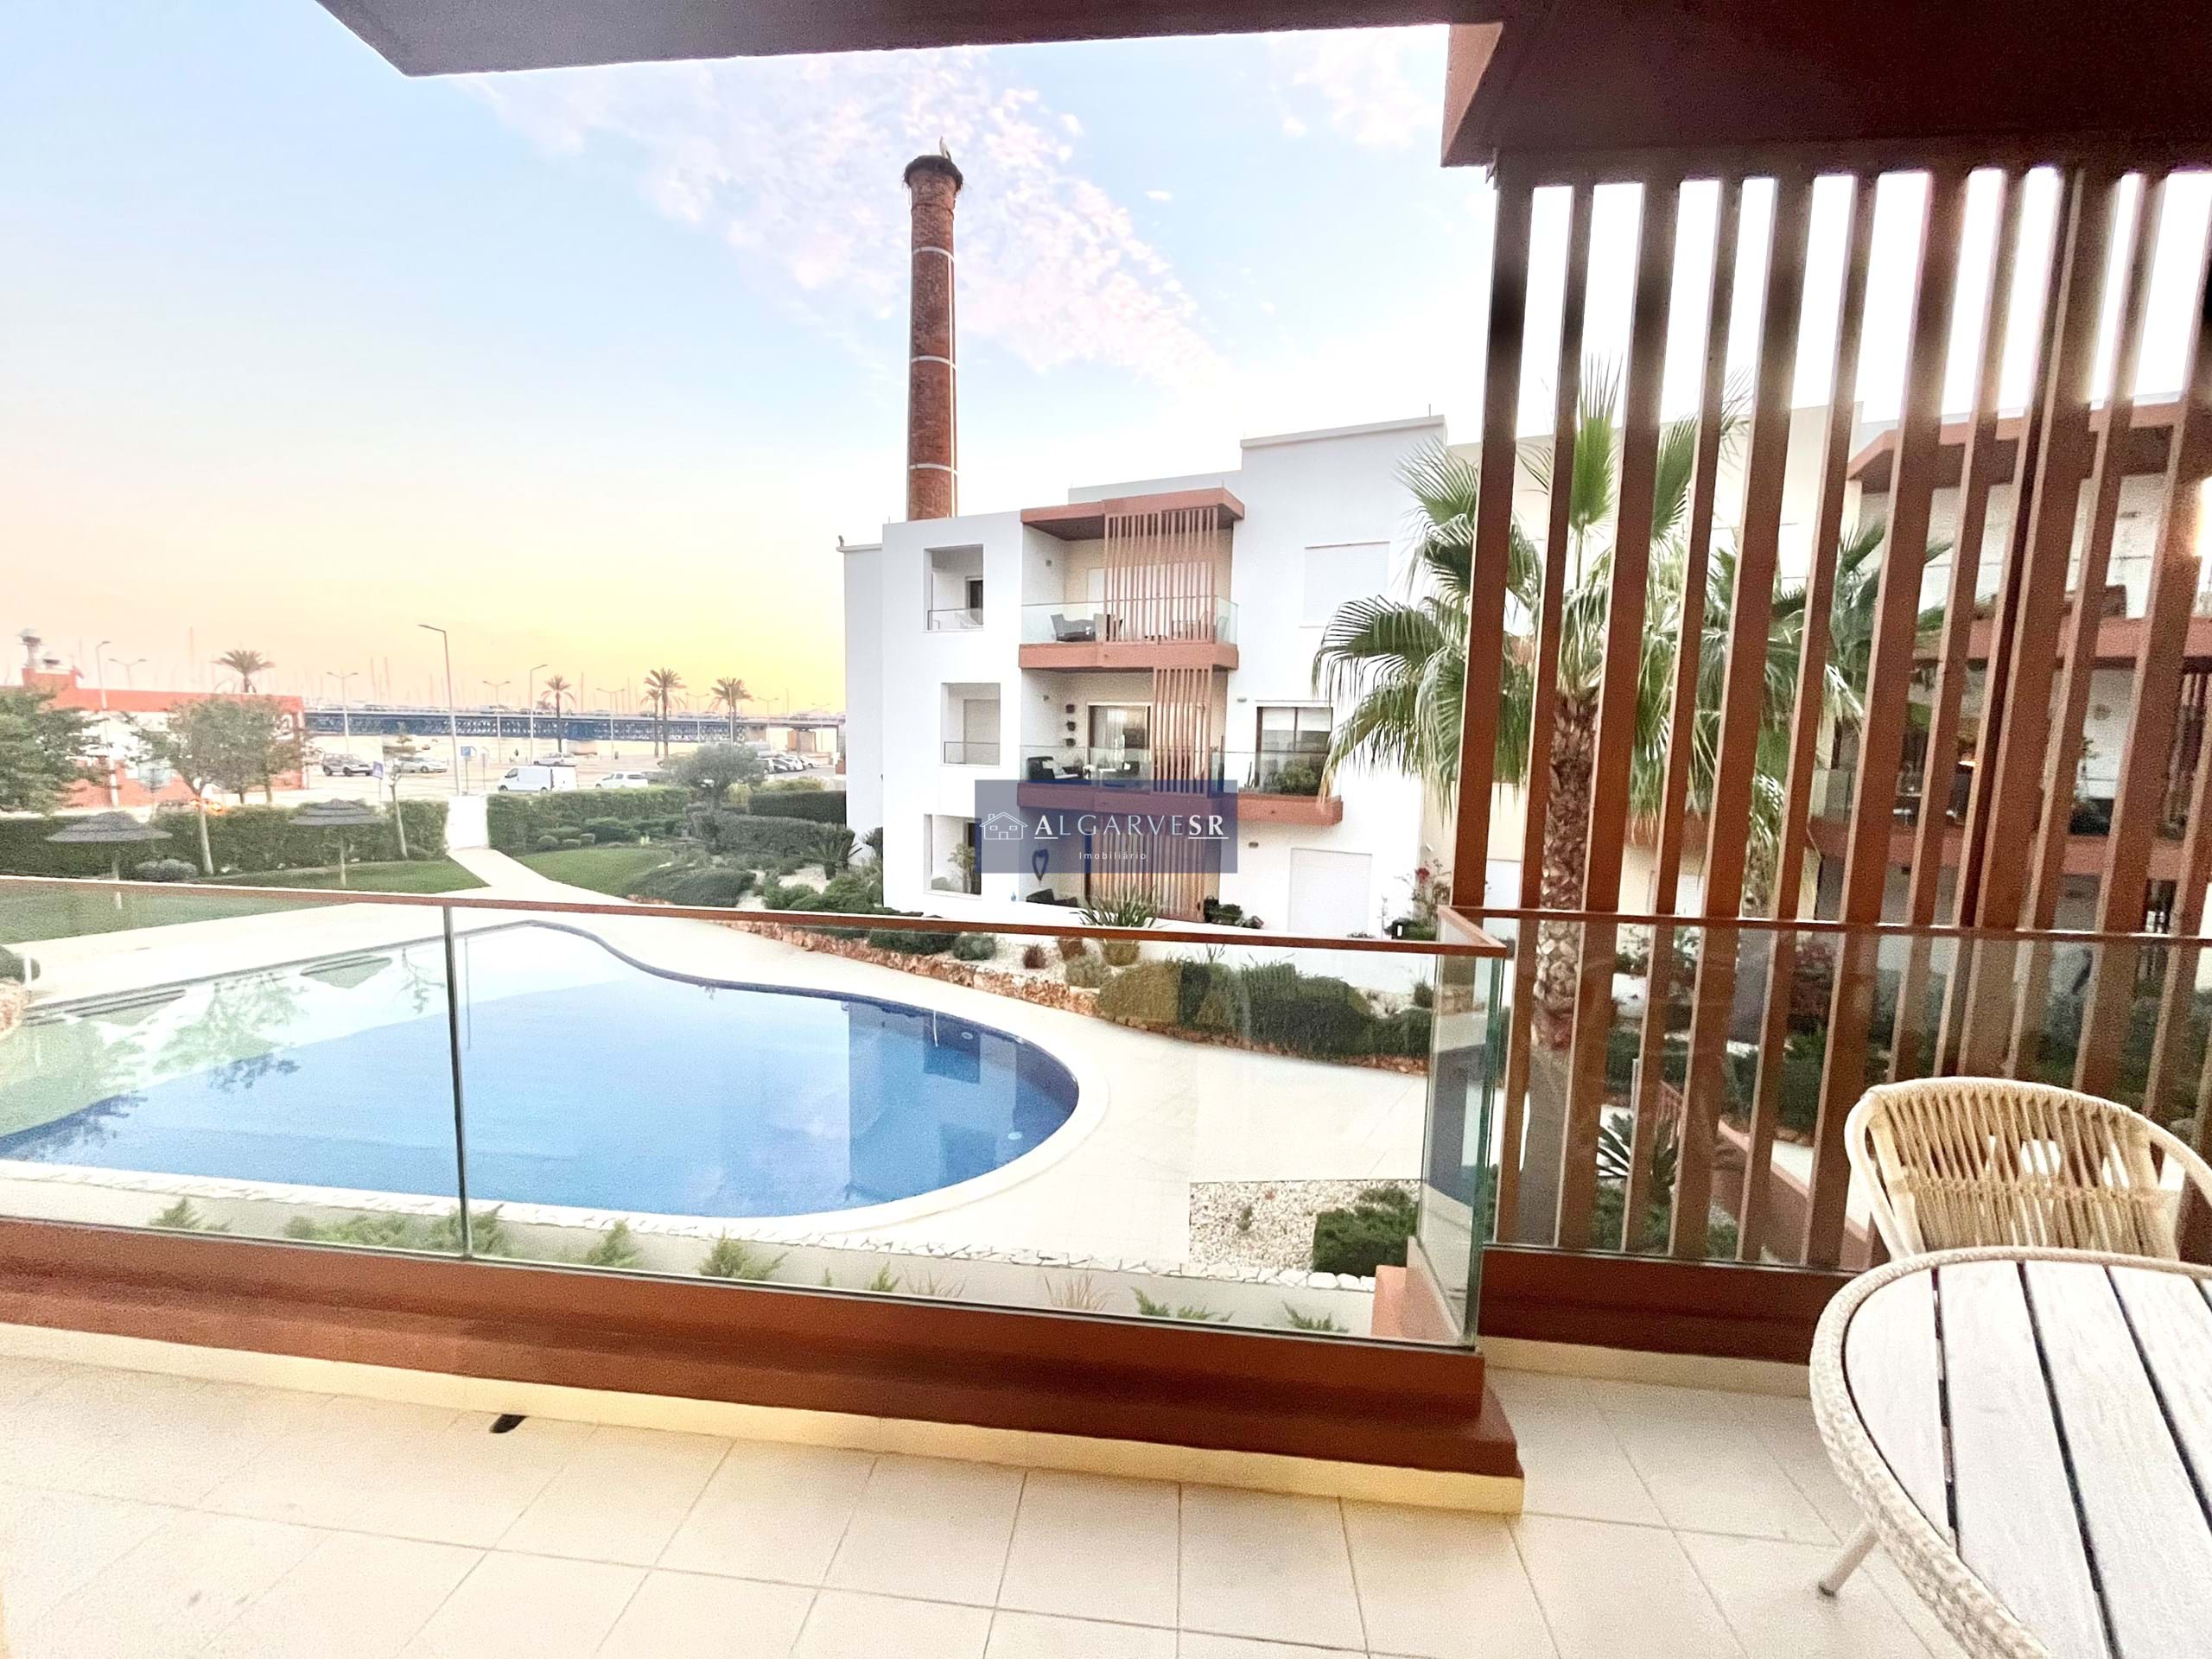 Fabulous 2 Bedroom Apartment with Pool and Closed Garage - Riverside Portimao